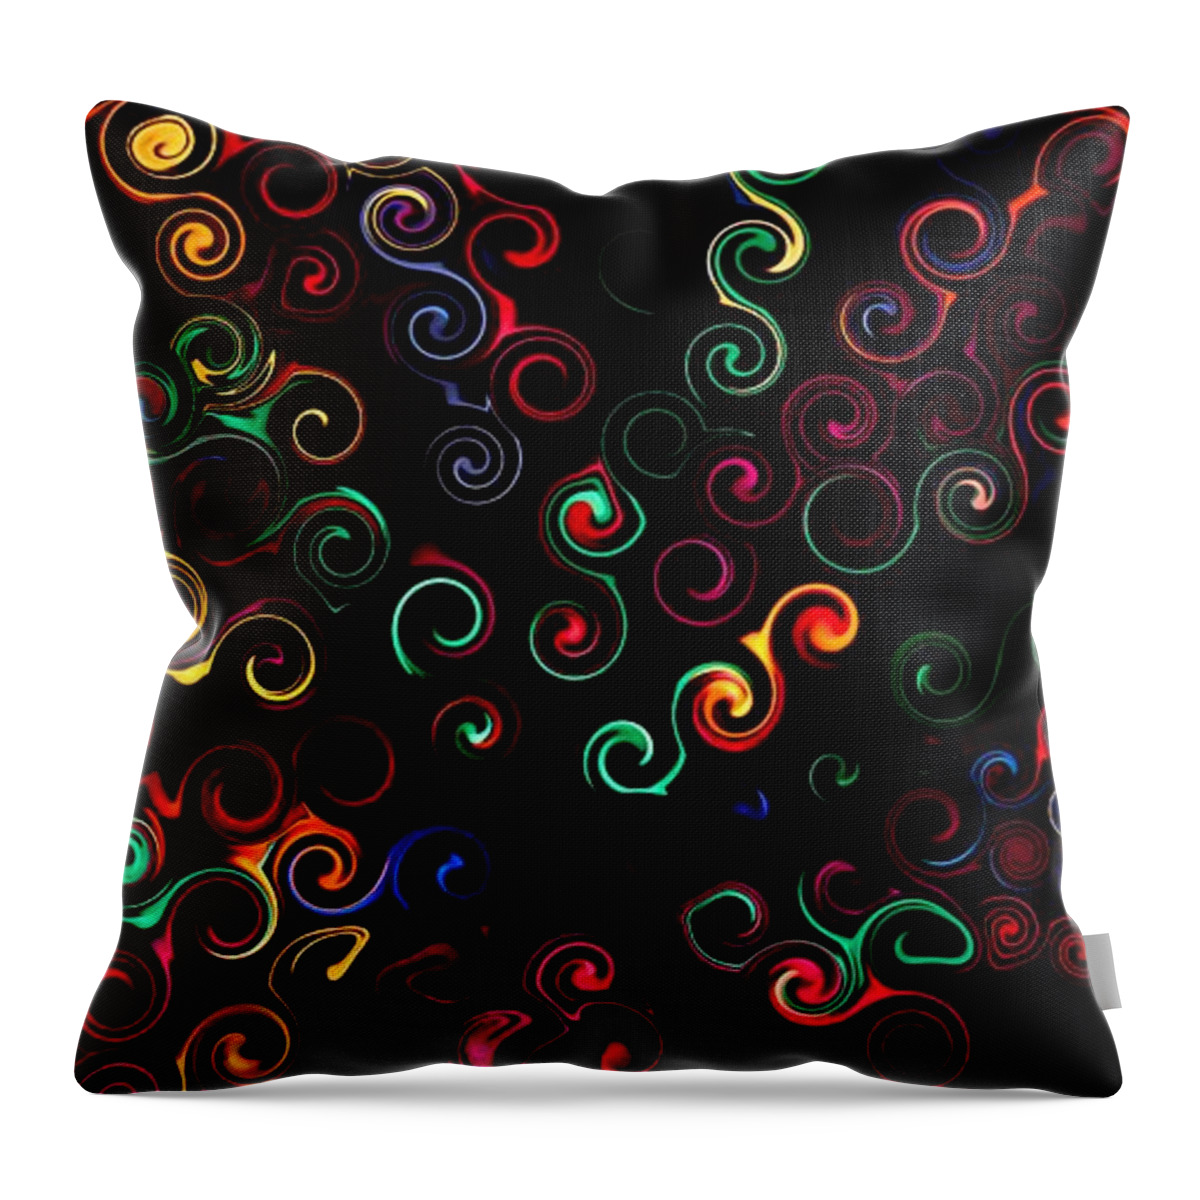 Bill Kesler Photography Throw Pillow featuring the photograph Curly Swirls by Bill Kesler